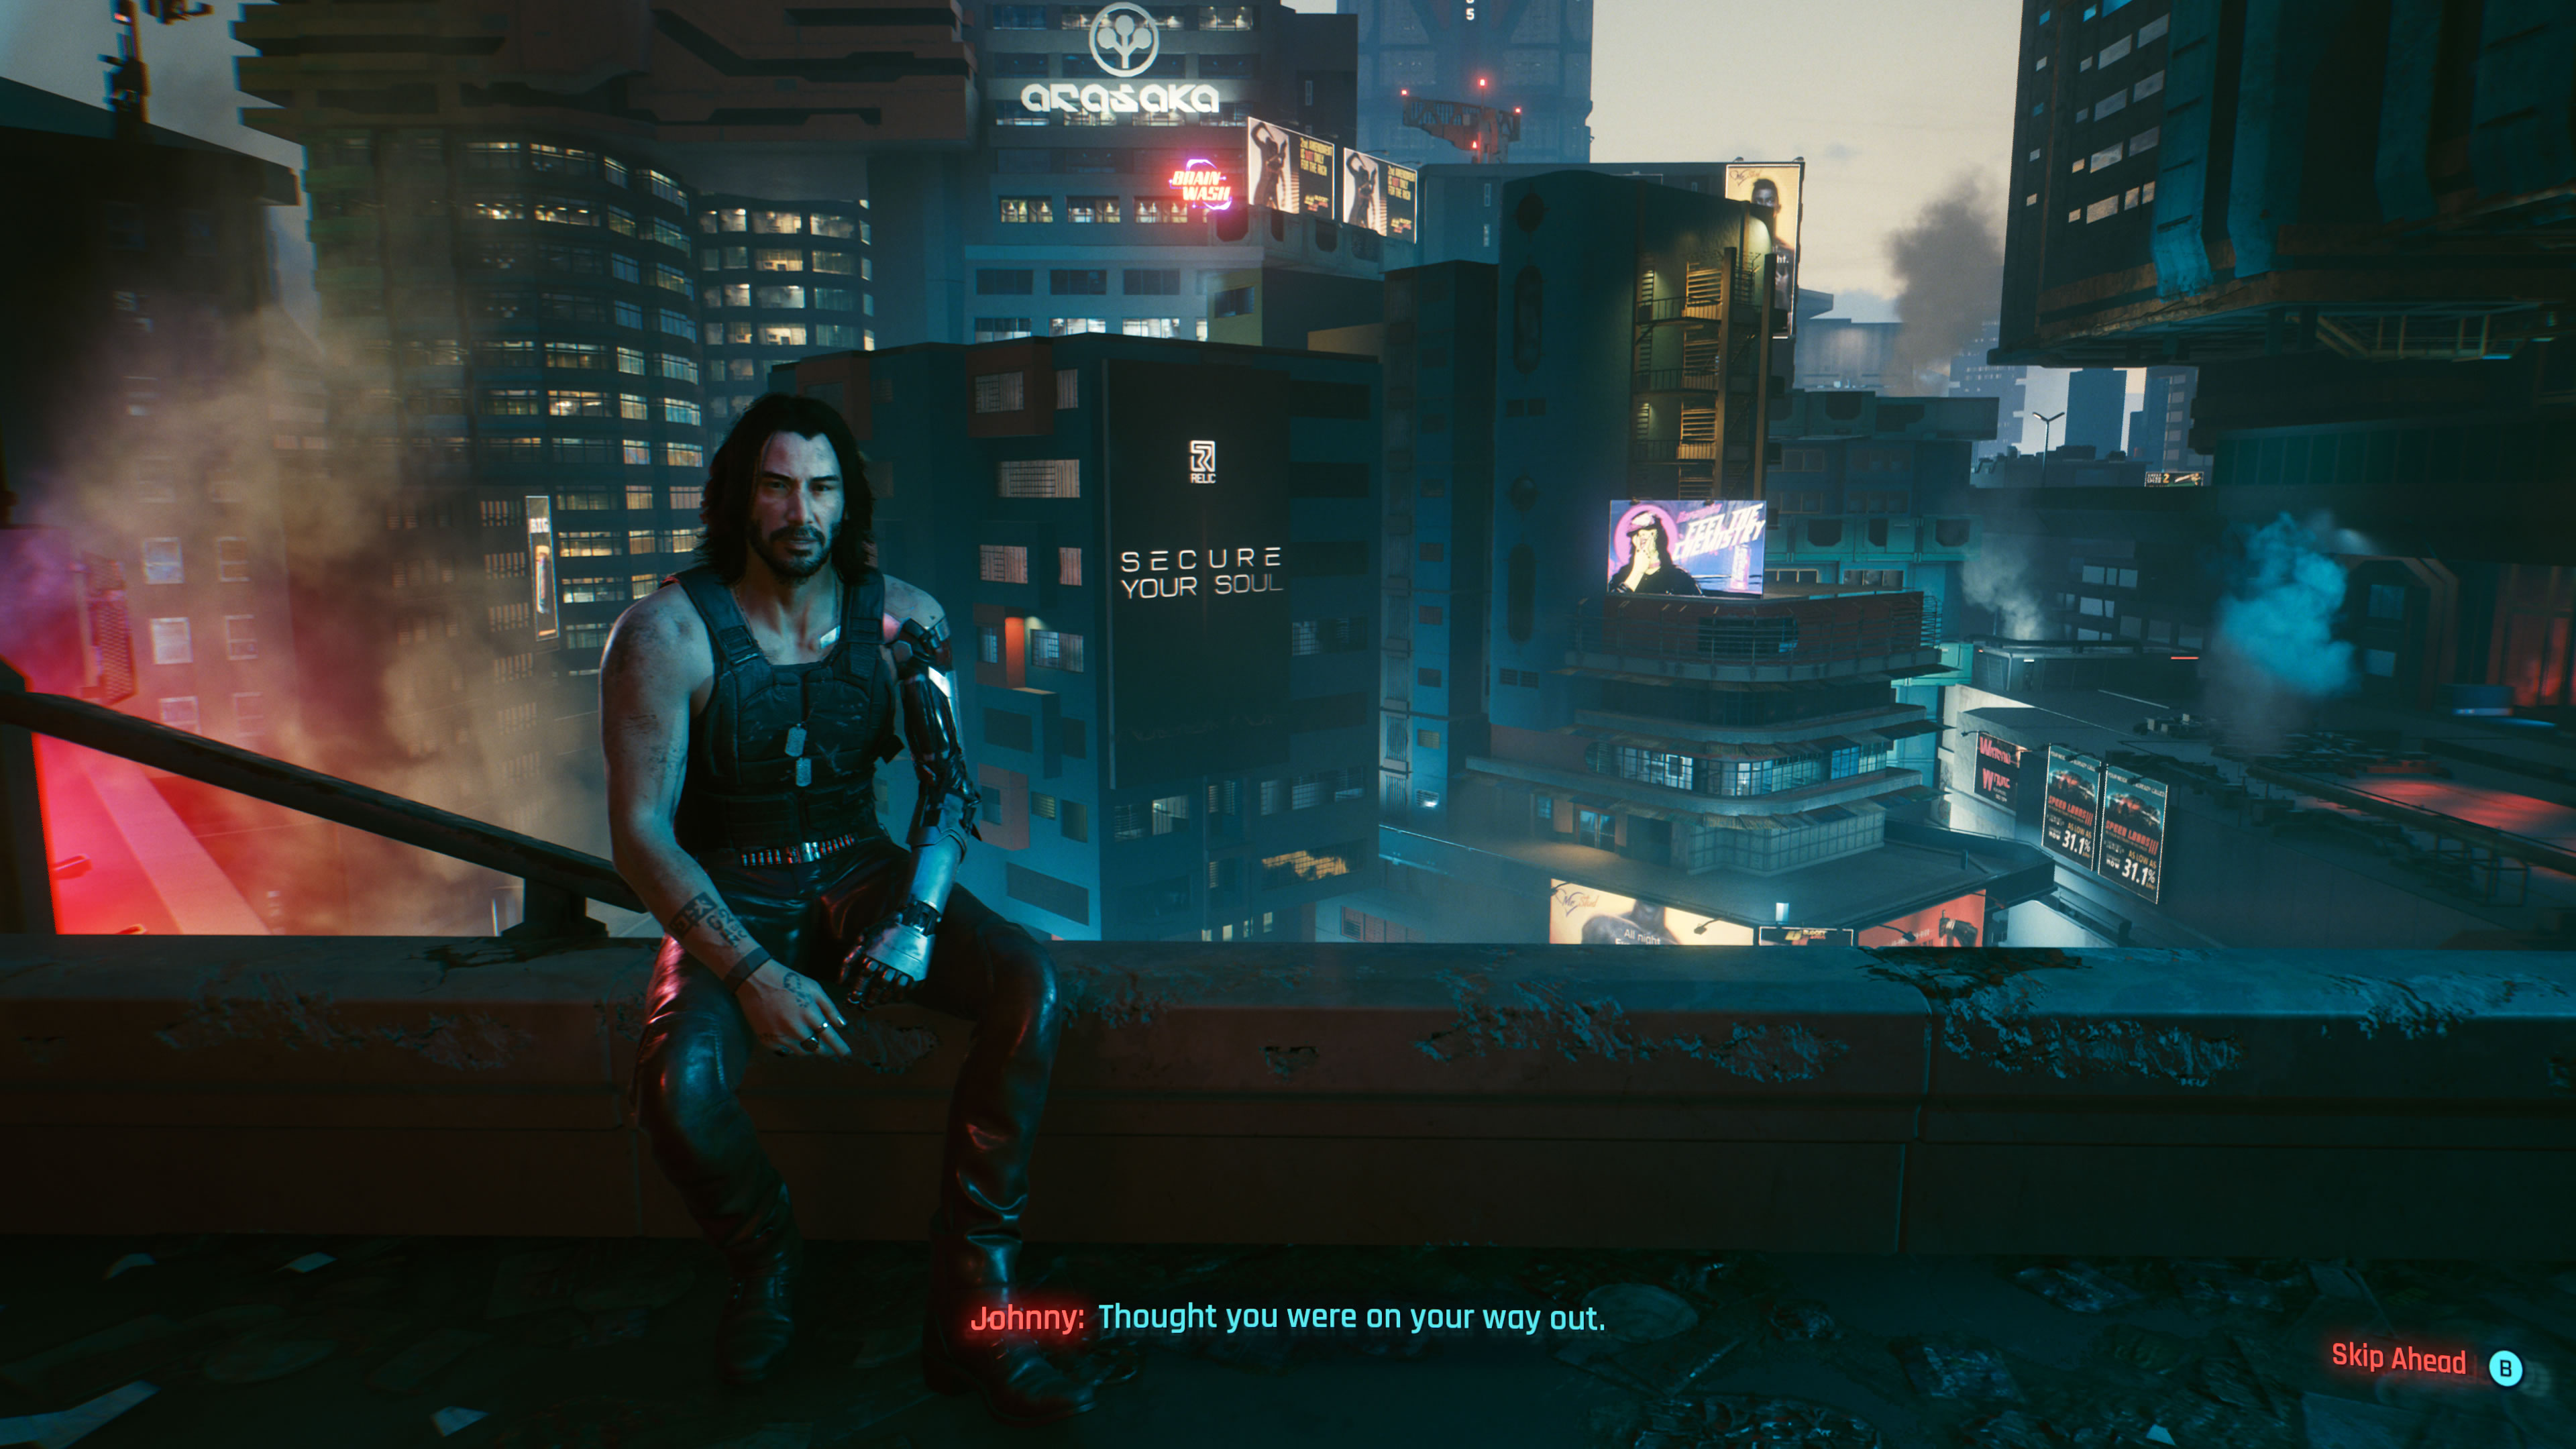 LastKnownMeal on X: Good day everyone! My new Cyberpunk 2077 modlist  featuring amazing new releases is here. Sorry for the slight delay  accidentally broke my entire game and had to redo some